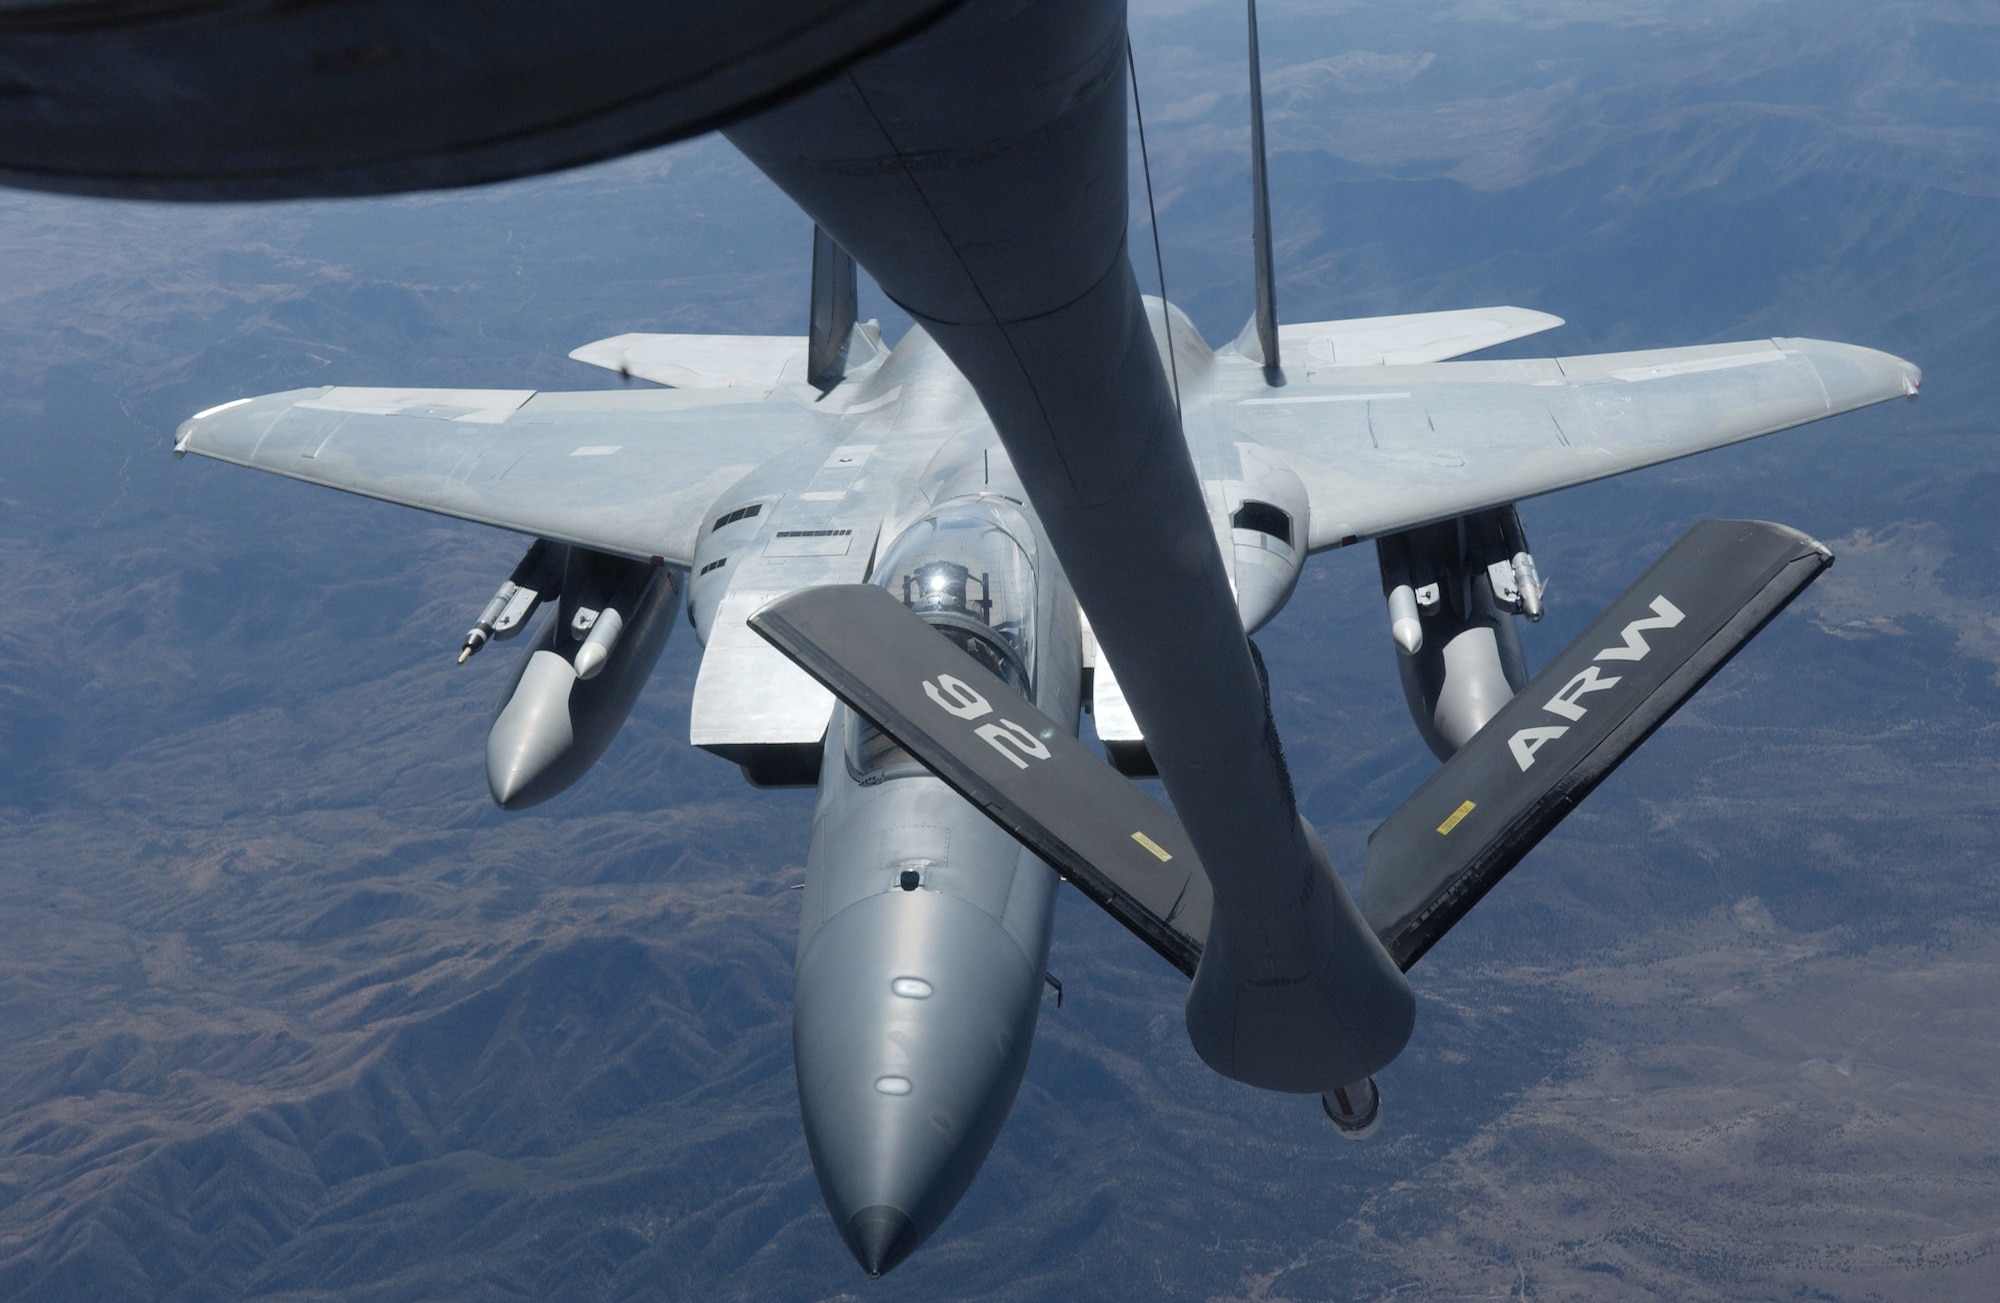 An F-15  Eagle approaches the boom on a KC-135 Stratotanker to refuel Oct. 11 during Red Flag 07-1 being held at Nellis Air Force Base, Nev. Red Flag runs from Oct. 10 to 20 and tests aircrews' warfighting skills in realistic combat situations. The aircraft will be flying missions during the day and night at the nearby Nevada Test and Training Ranges where they will simulate an air war. U.S. servicemembers, with representatives from each branch of service along with coalition forces, are participating in Red Flag.  (U.S. Air Force photo/Master Sgt. Kevin J. Gruenwald)
